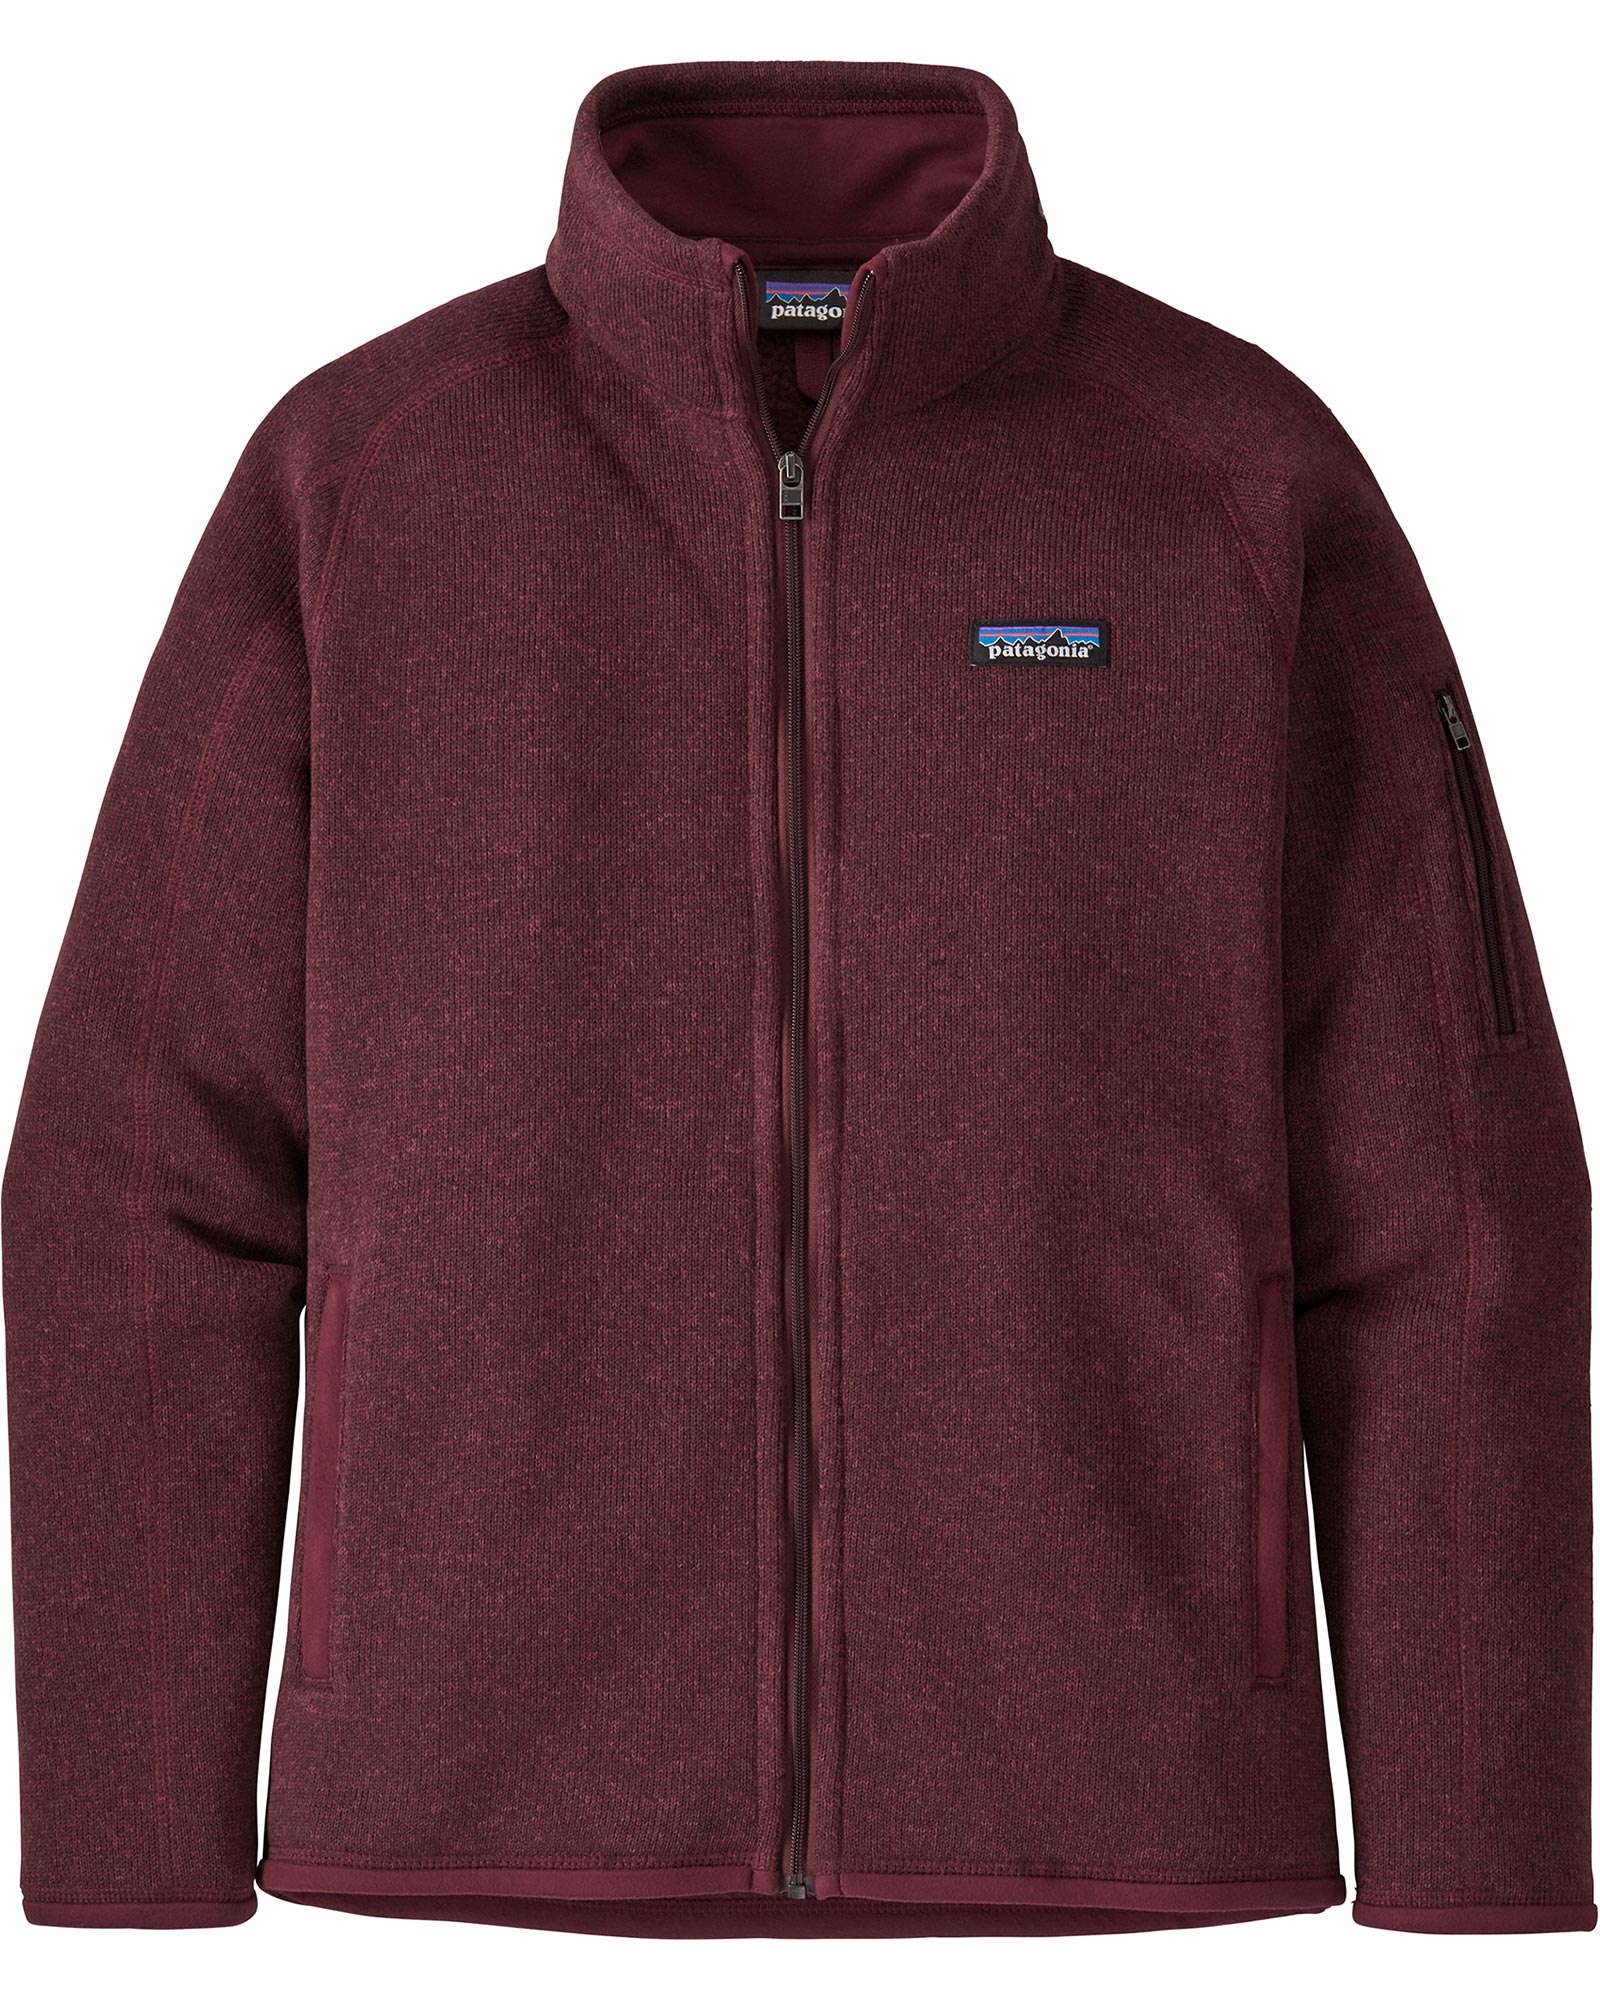 Patagonia Better Sweater Women’s Jacket - Chicory Red XS